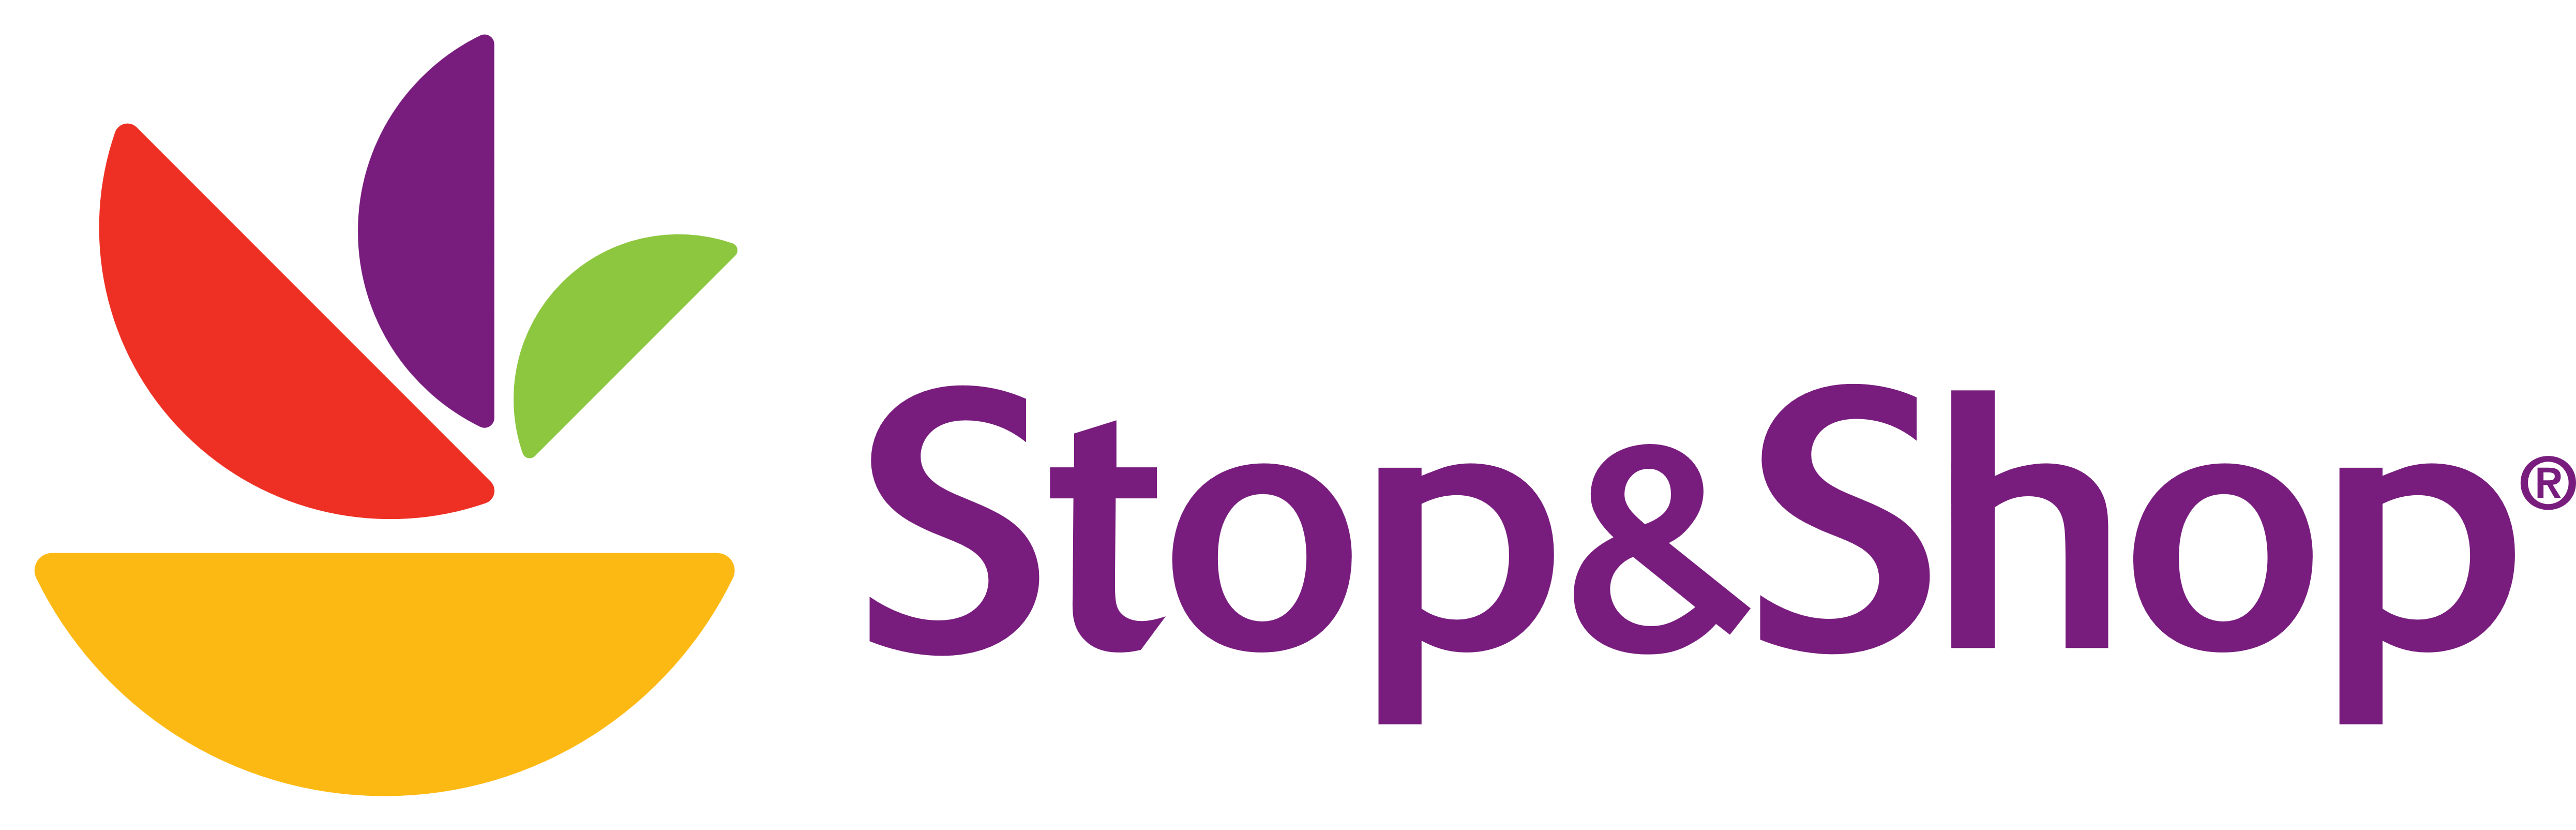 file-stop-shop2008-stop-and-shop-sign-clipart-large-size-png